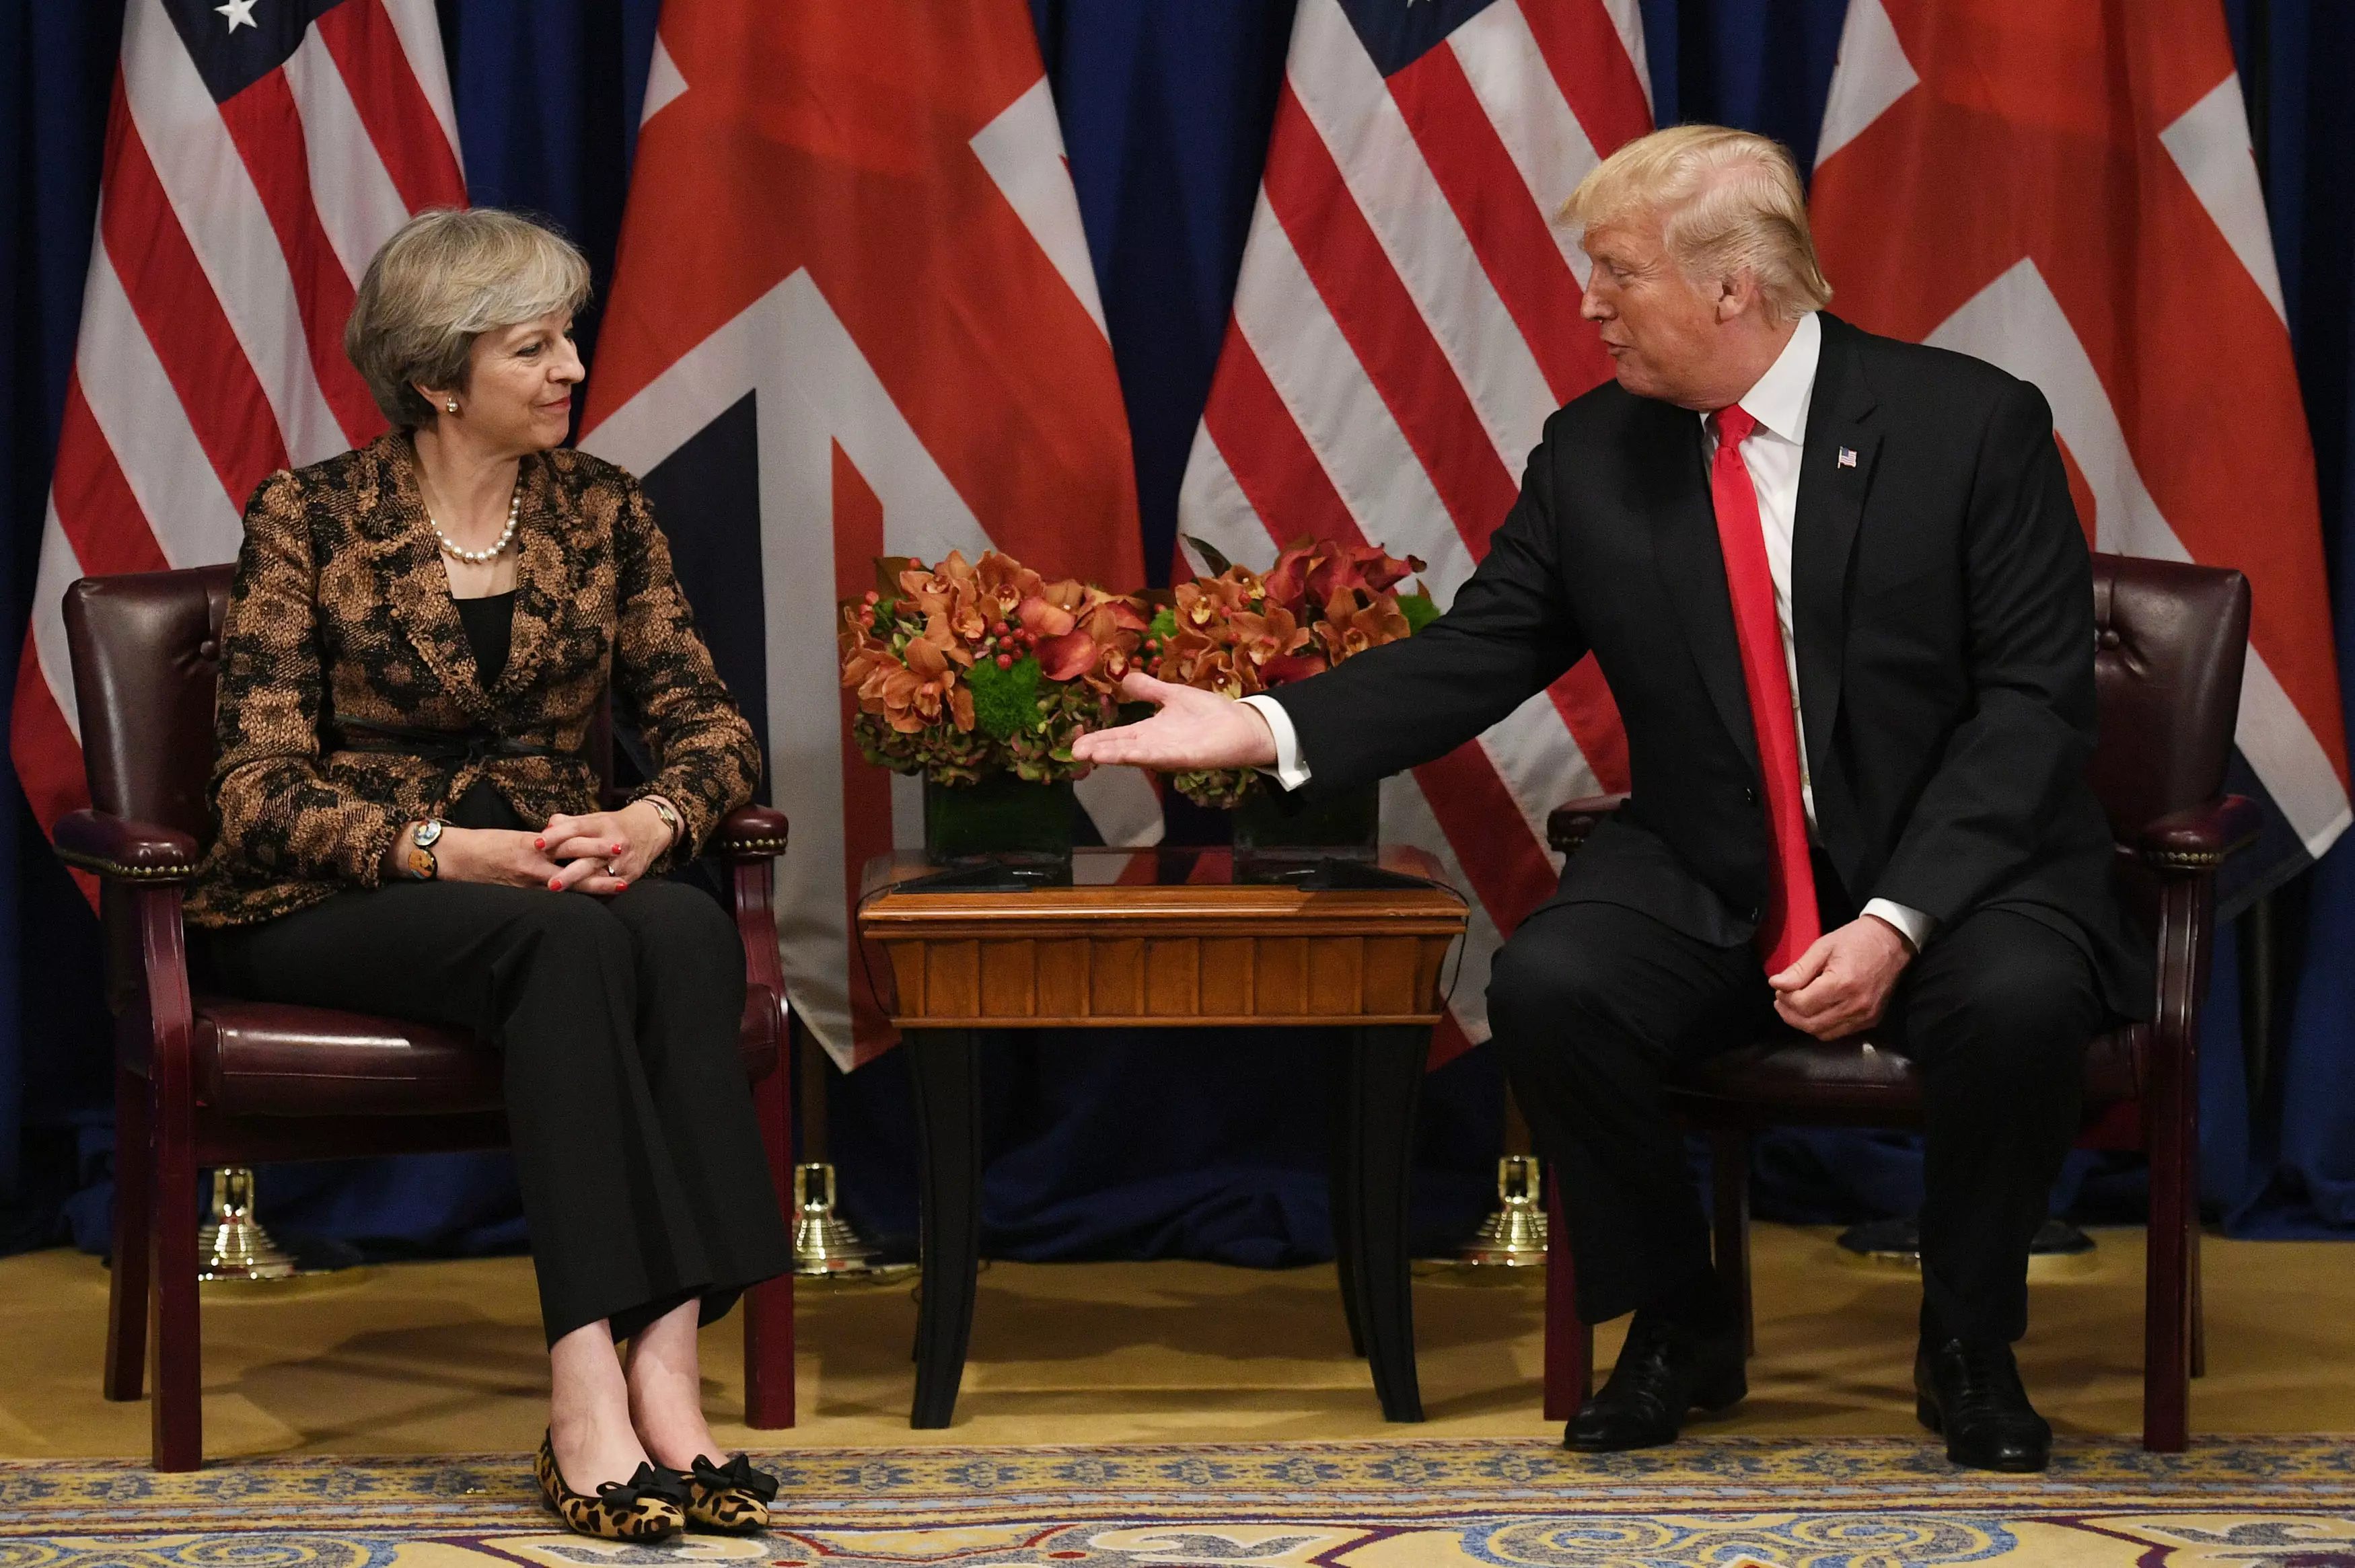 The pair met when the British PM visited the US last year.